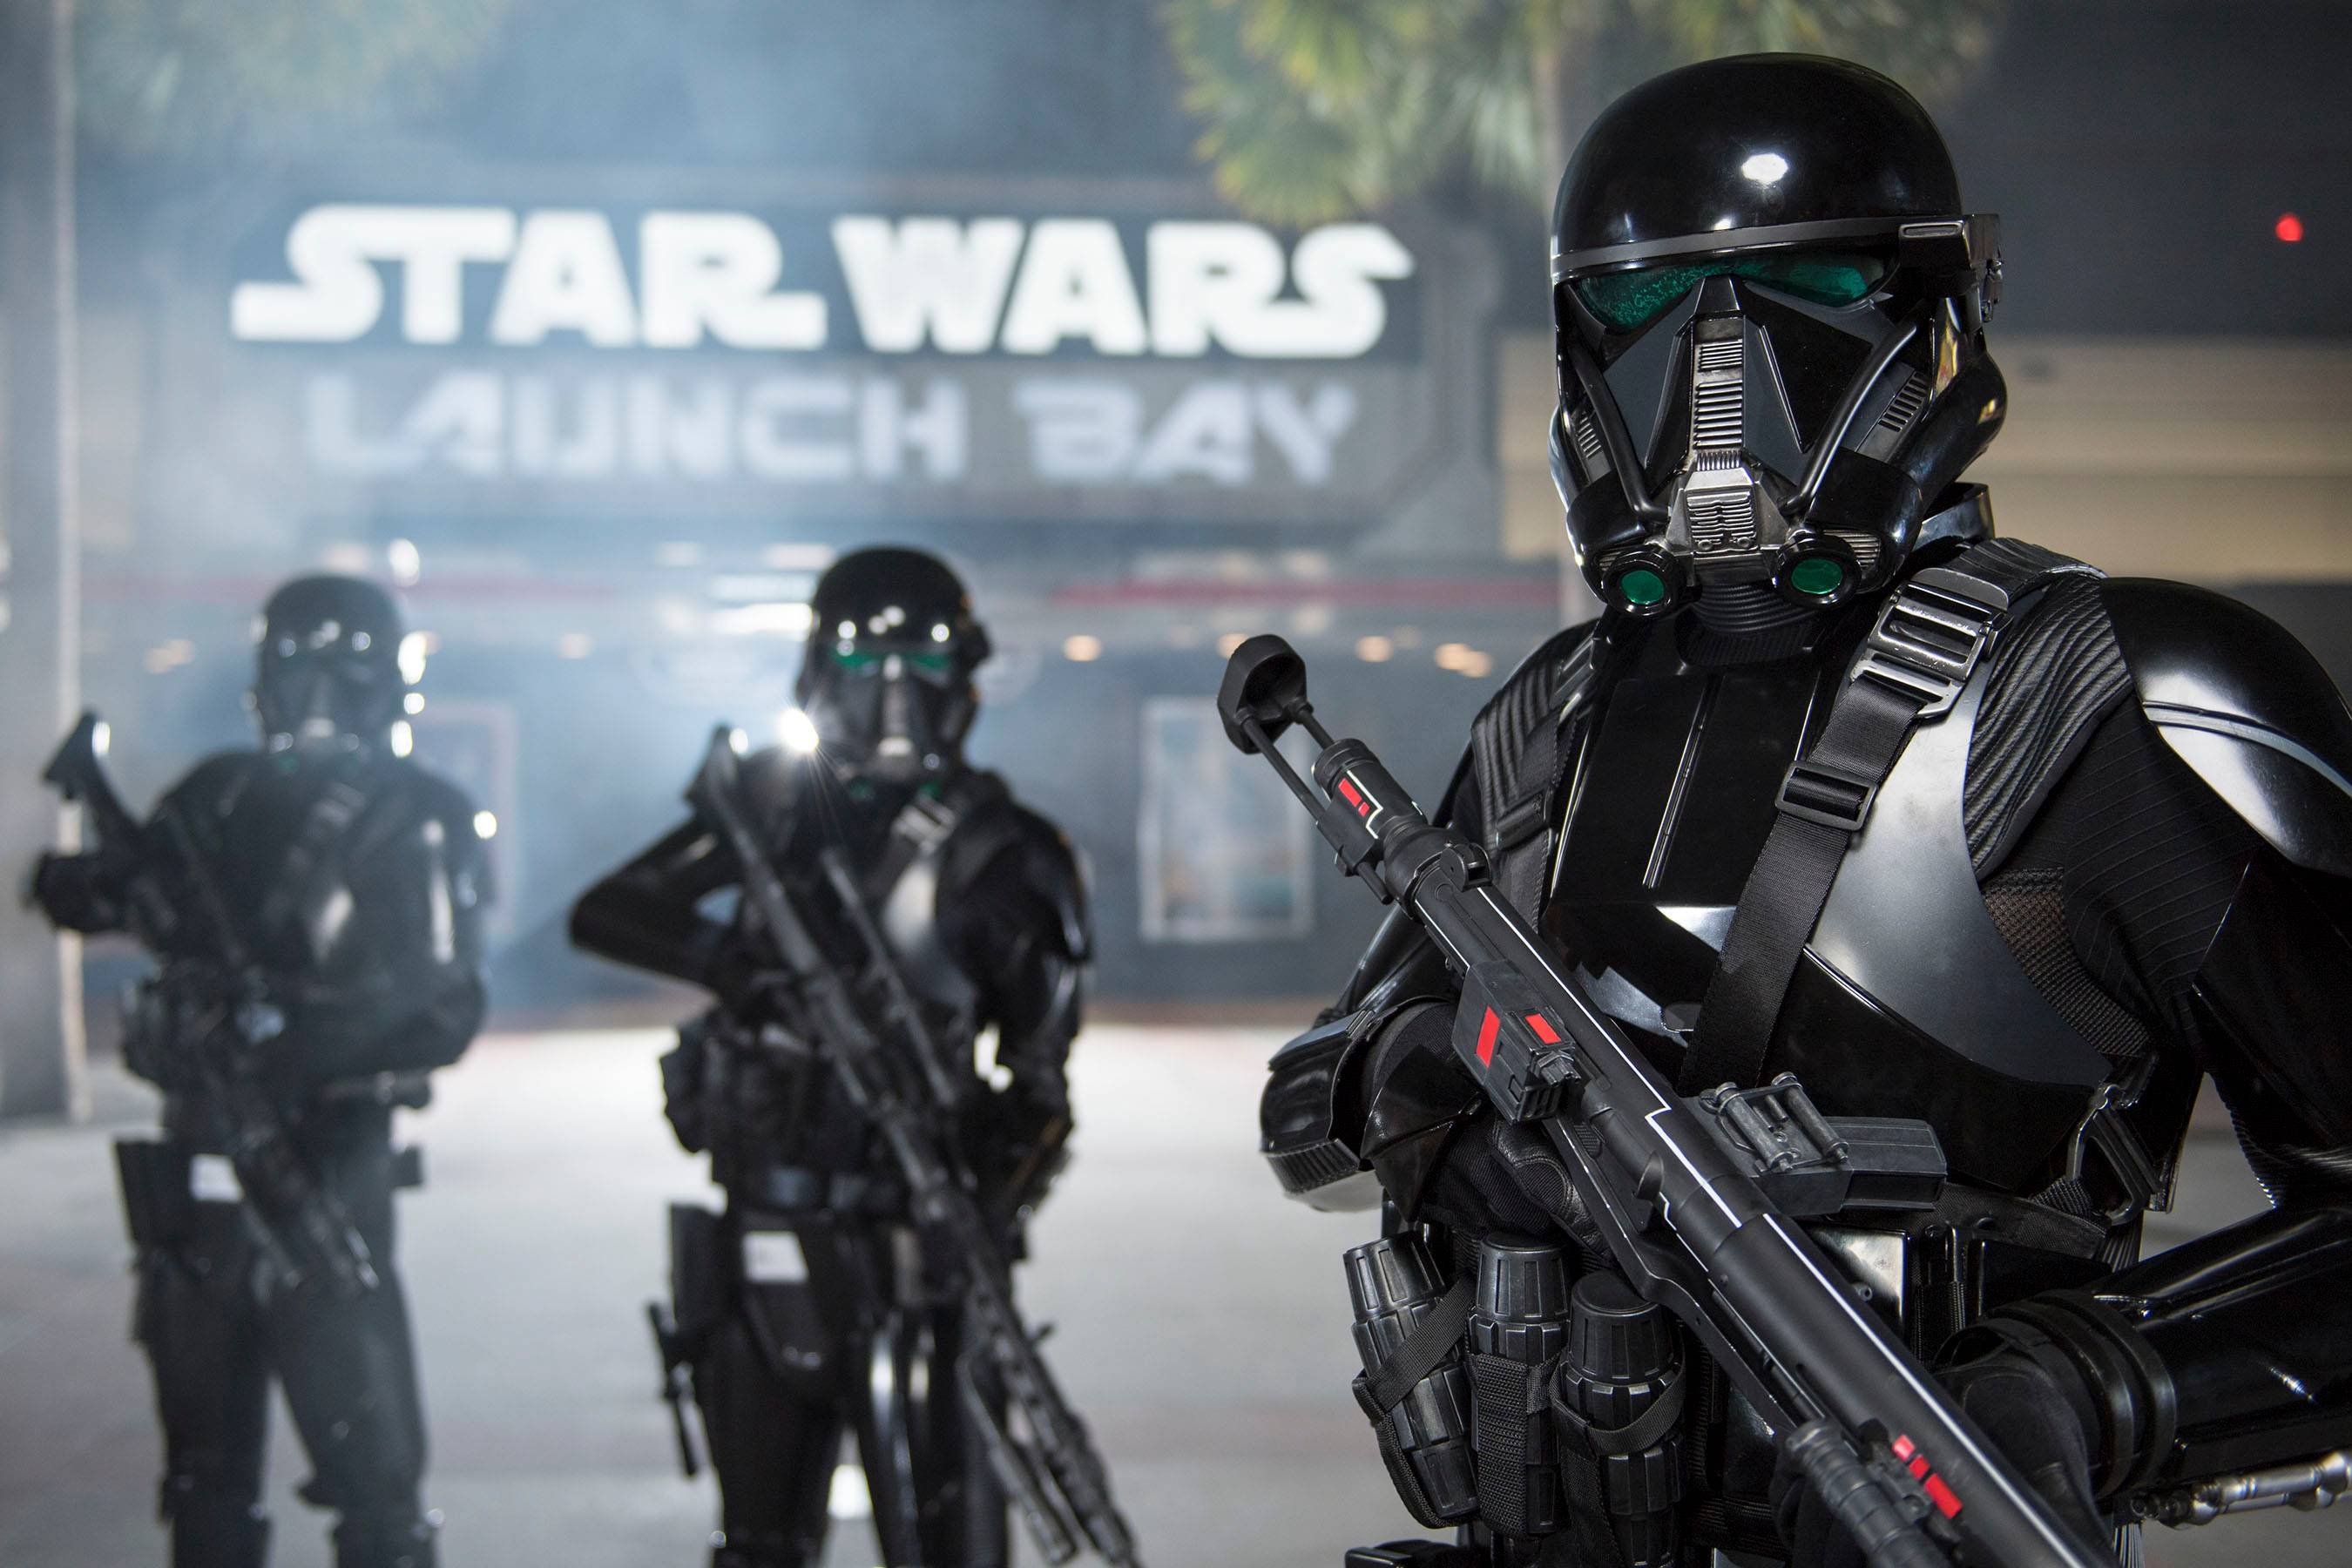 'Star Wars - A Galaxy Far, Far Away' to feature scenes and characters from the upcoming 'Rogue One - A Star Wars Story'